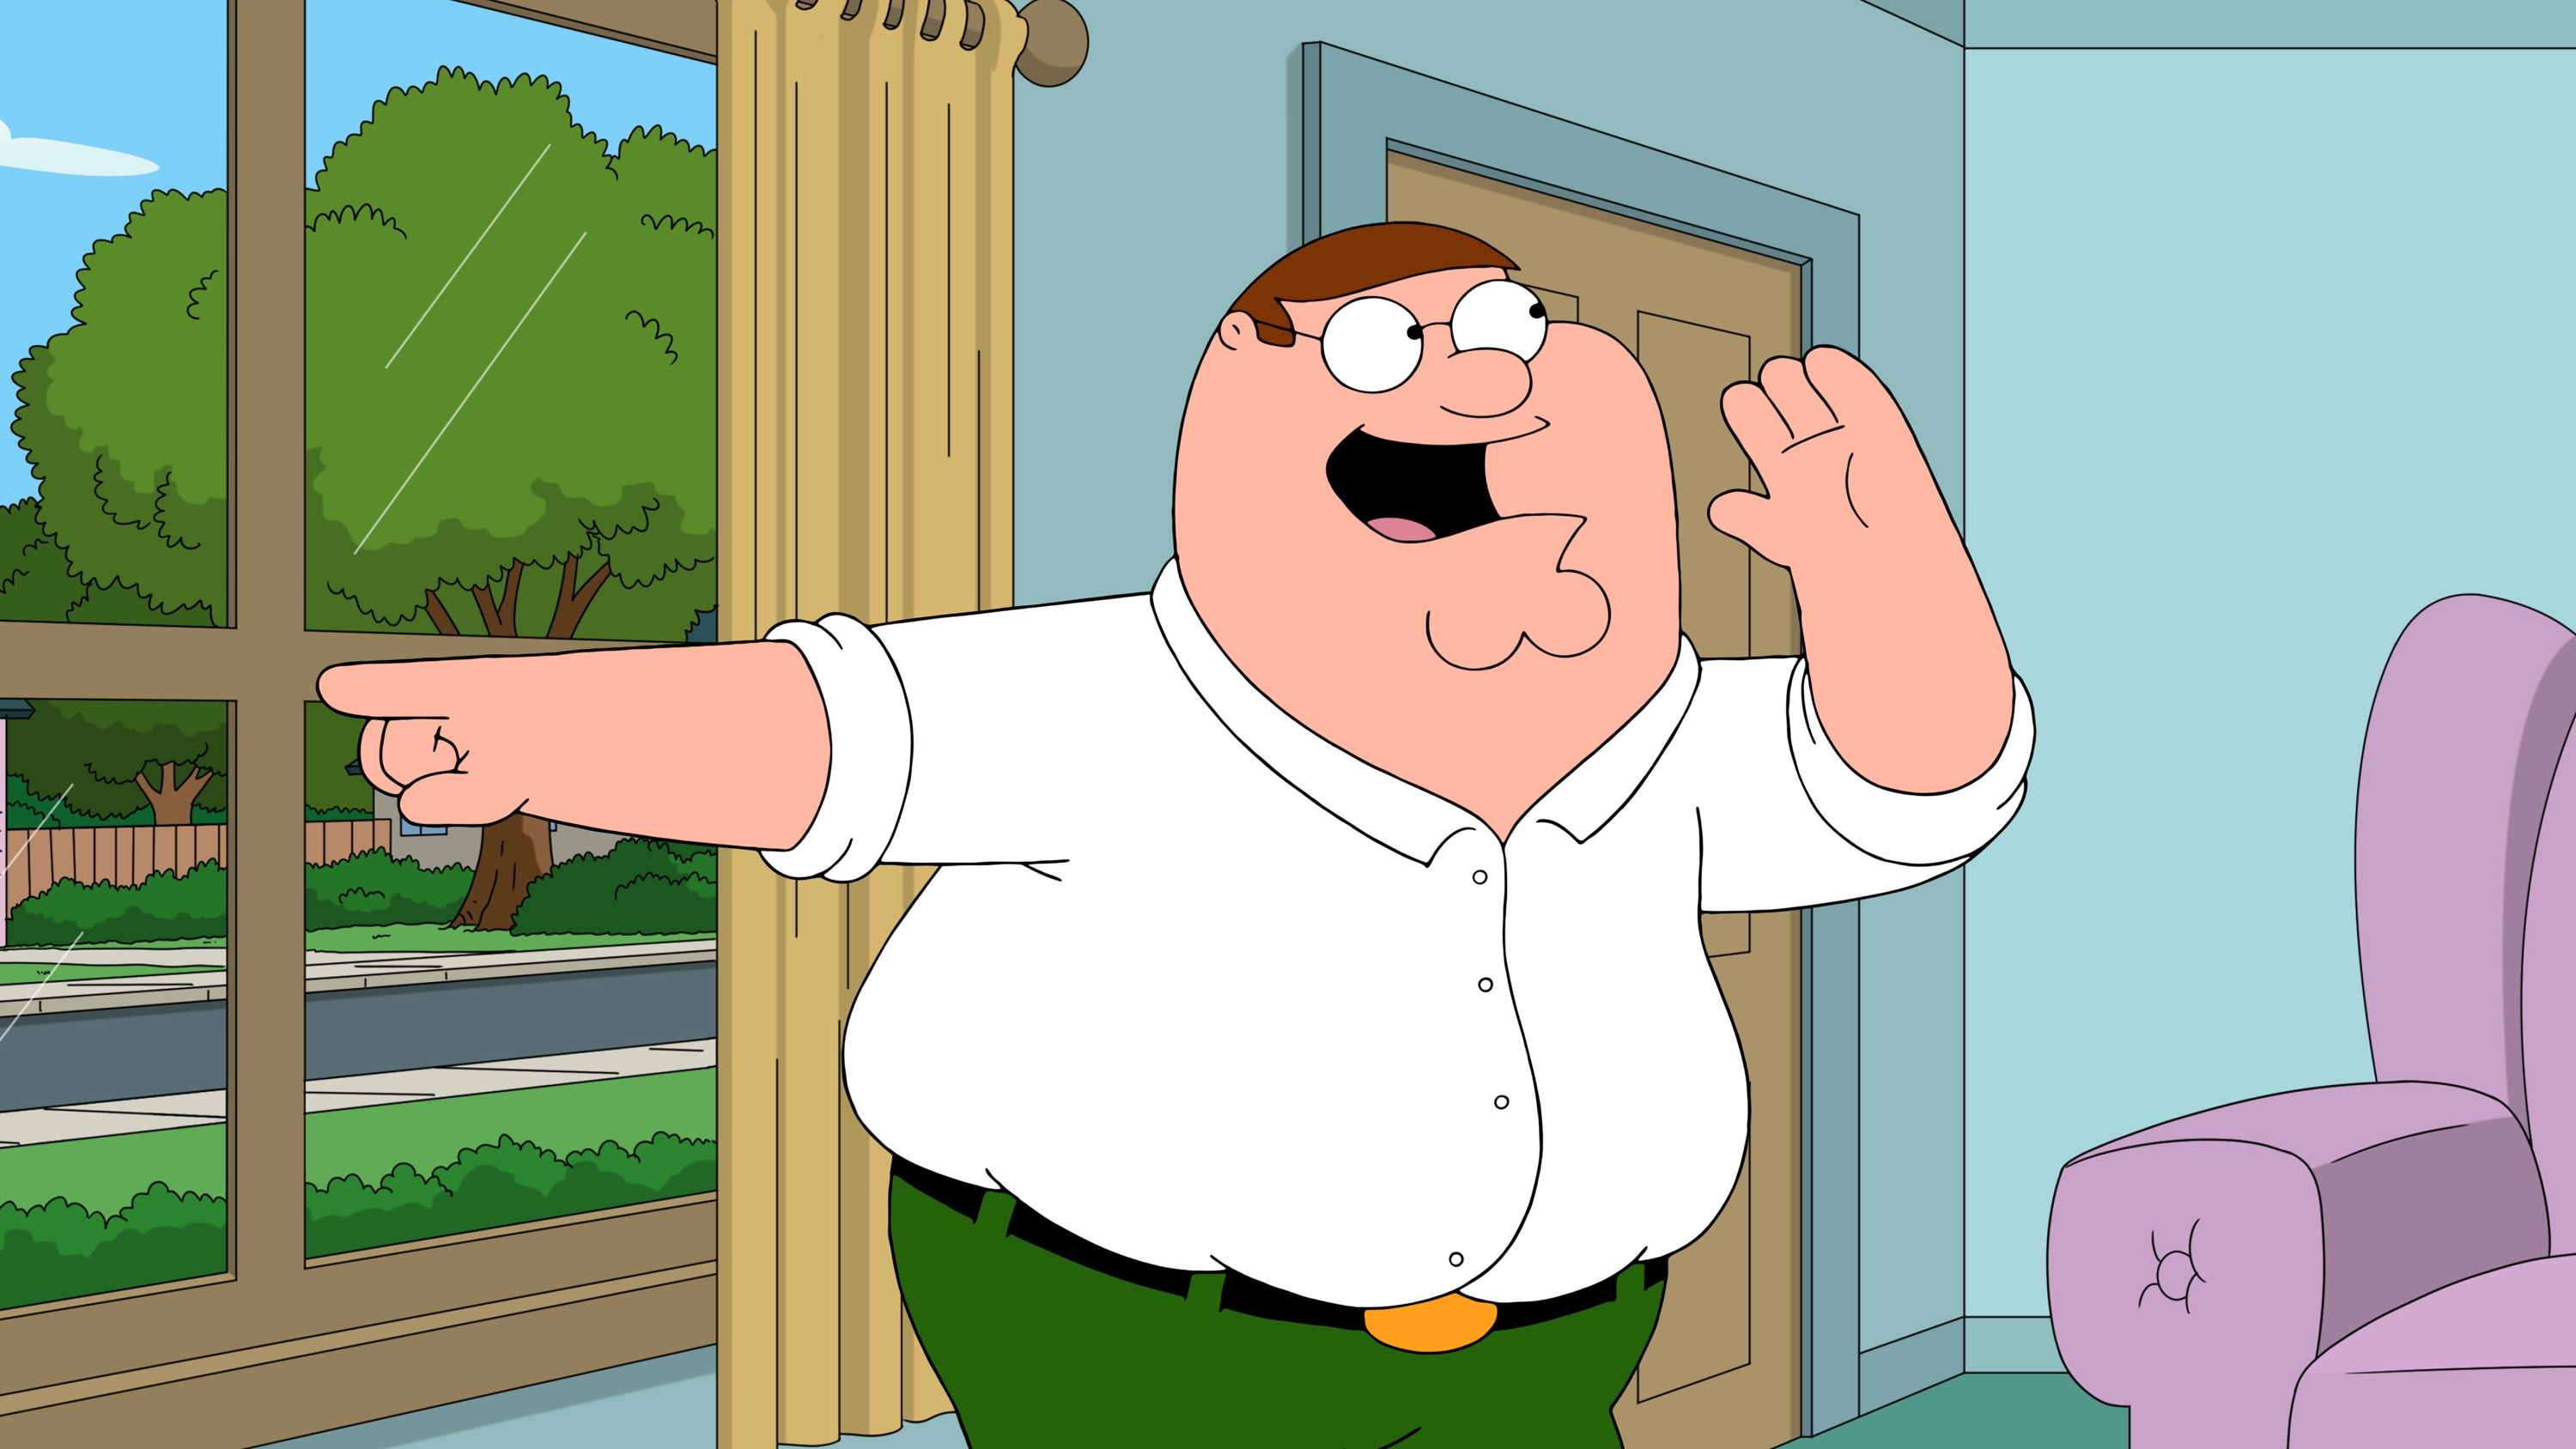 Peter Griffin points excitedly toward a window in his house in a still from Family Guy season 15